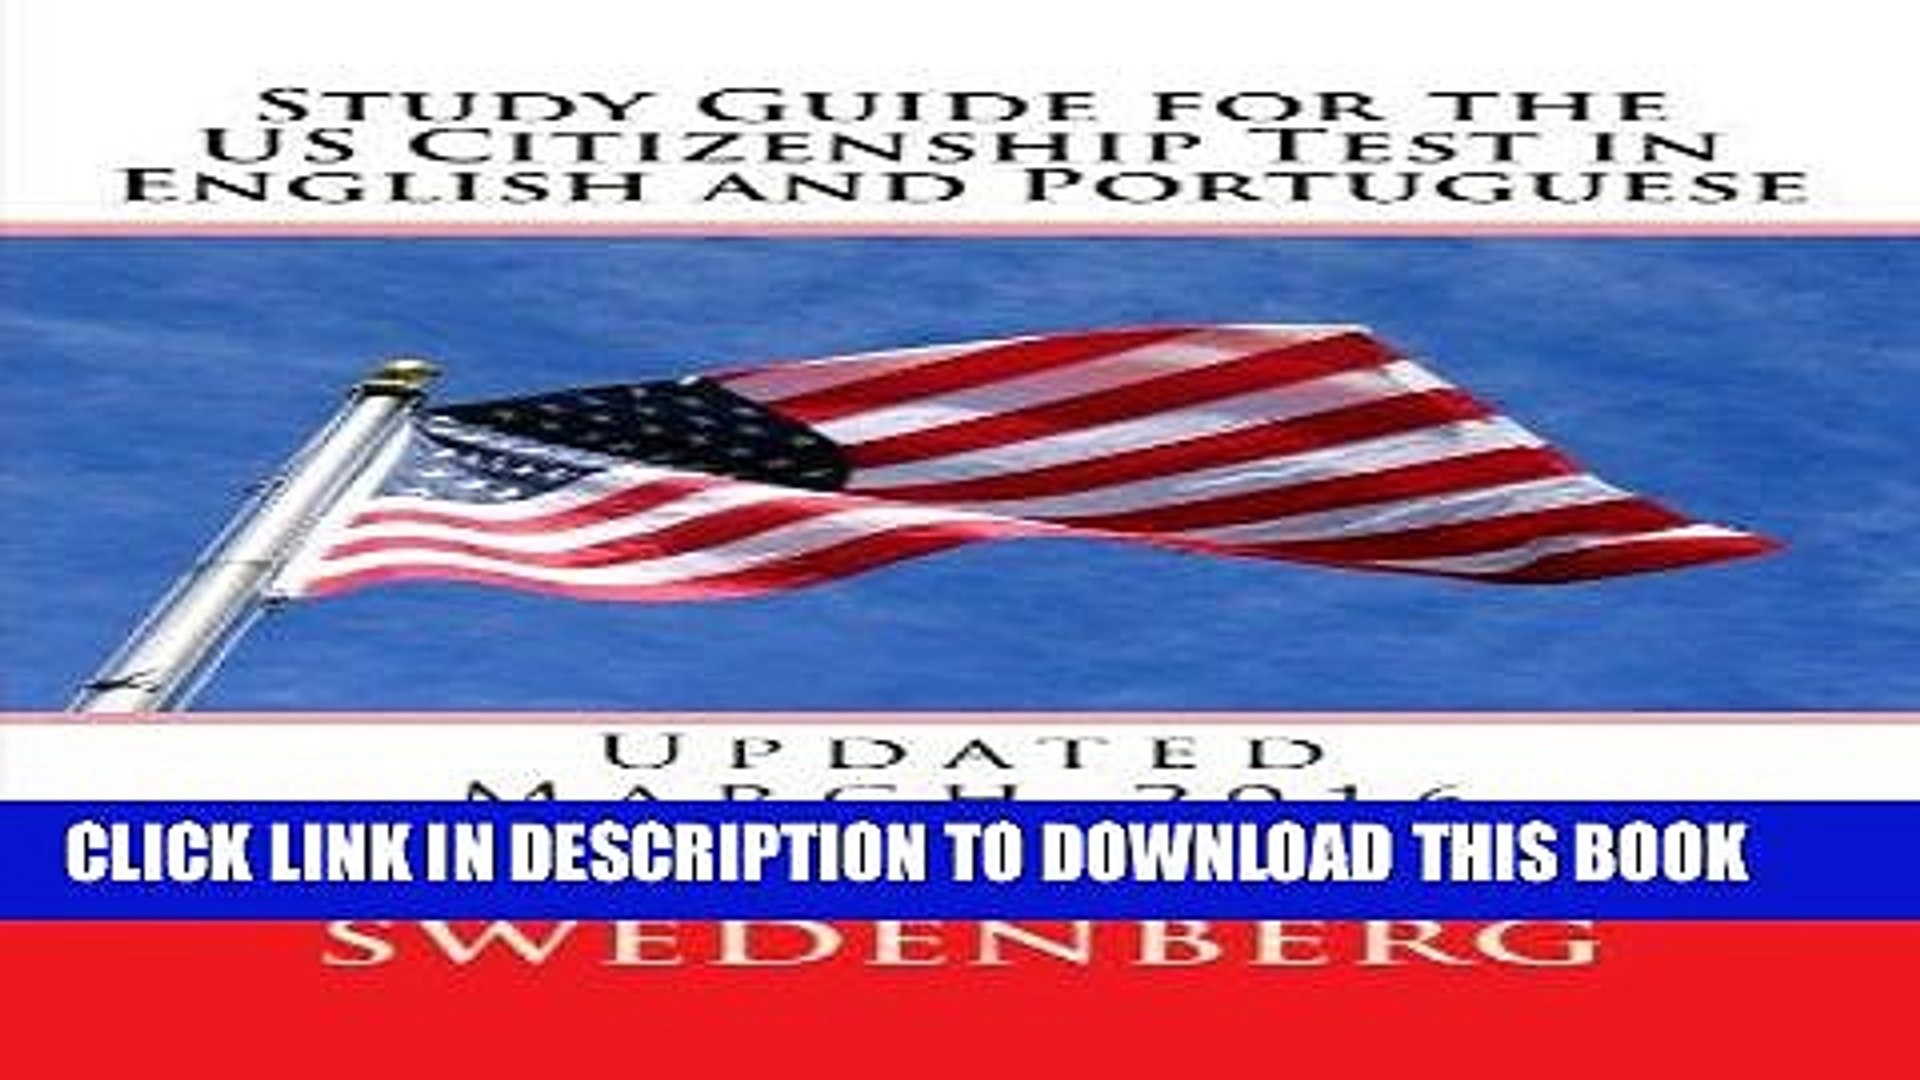 Read Now Study Guide for the US Citizenship Test in English and Portuguese: Updated March 2016